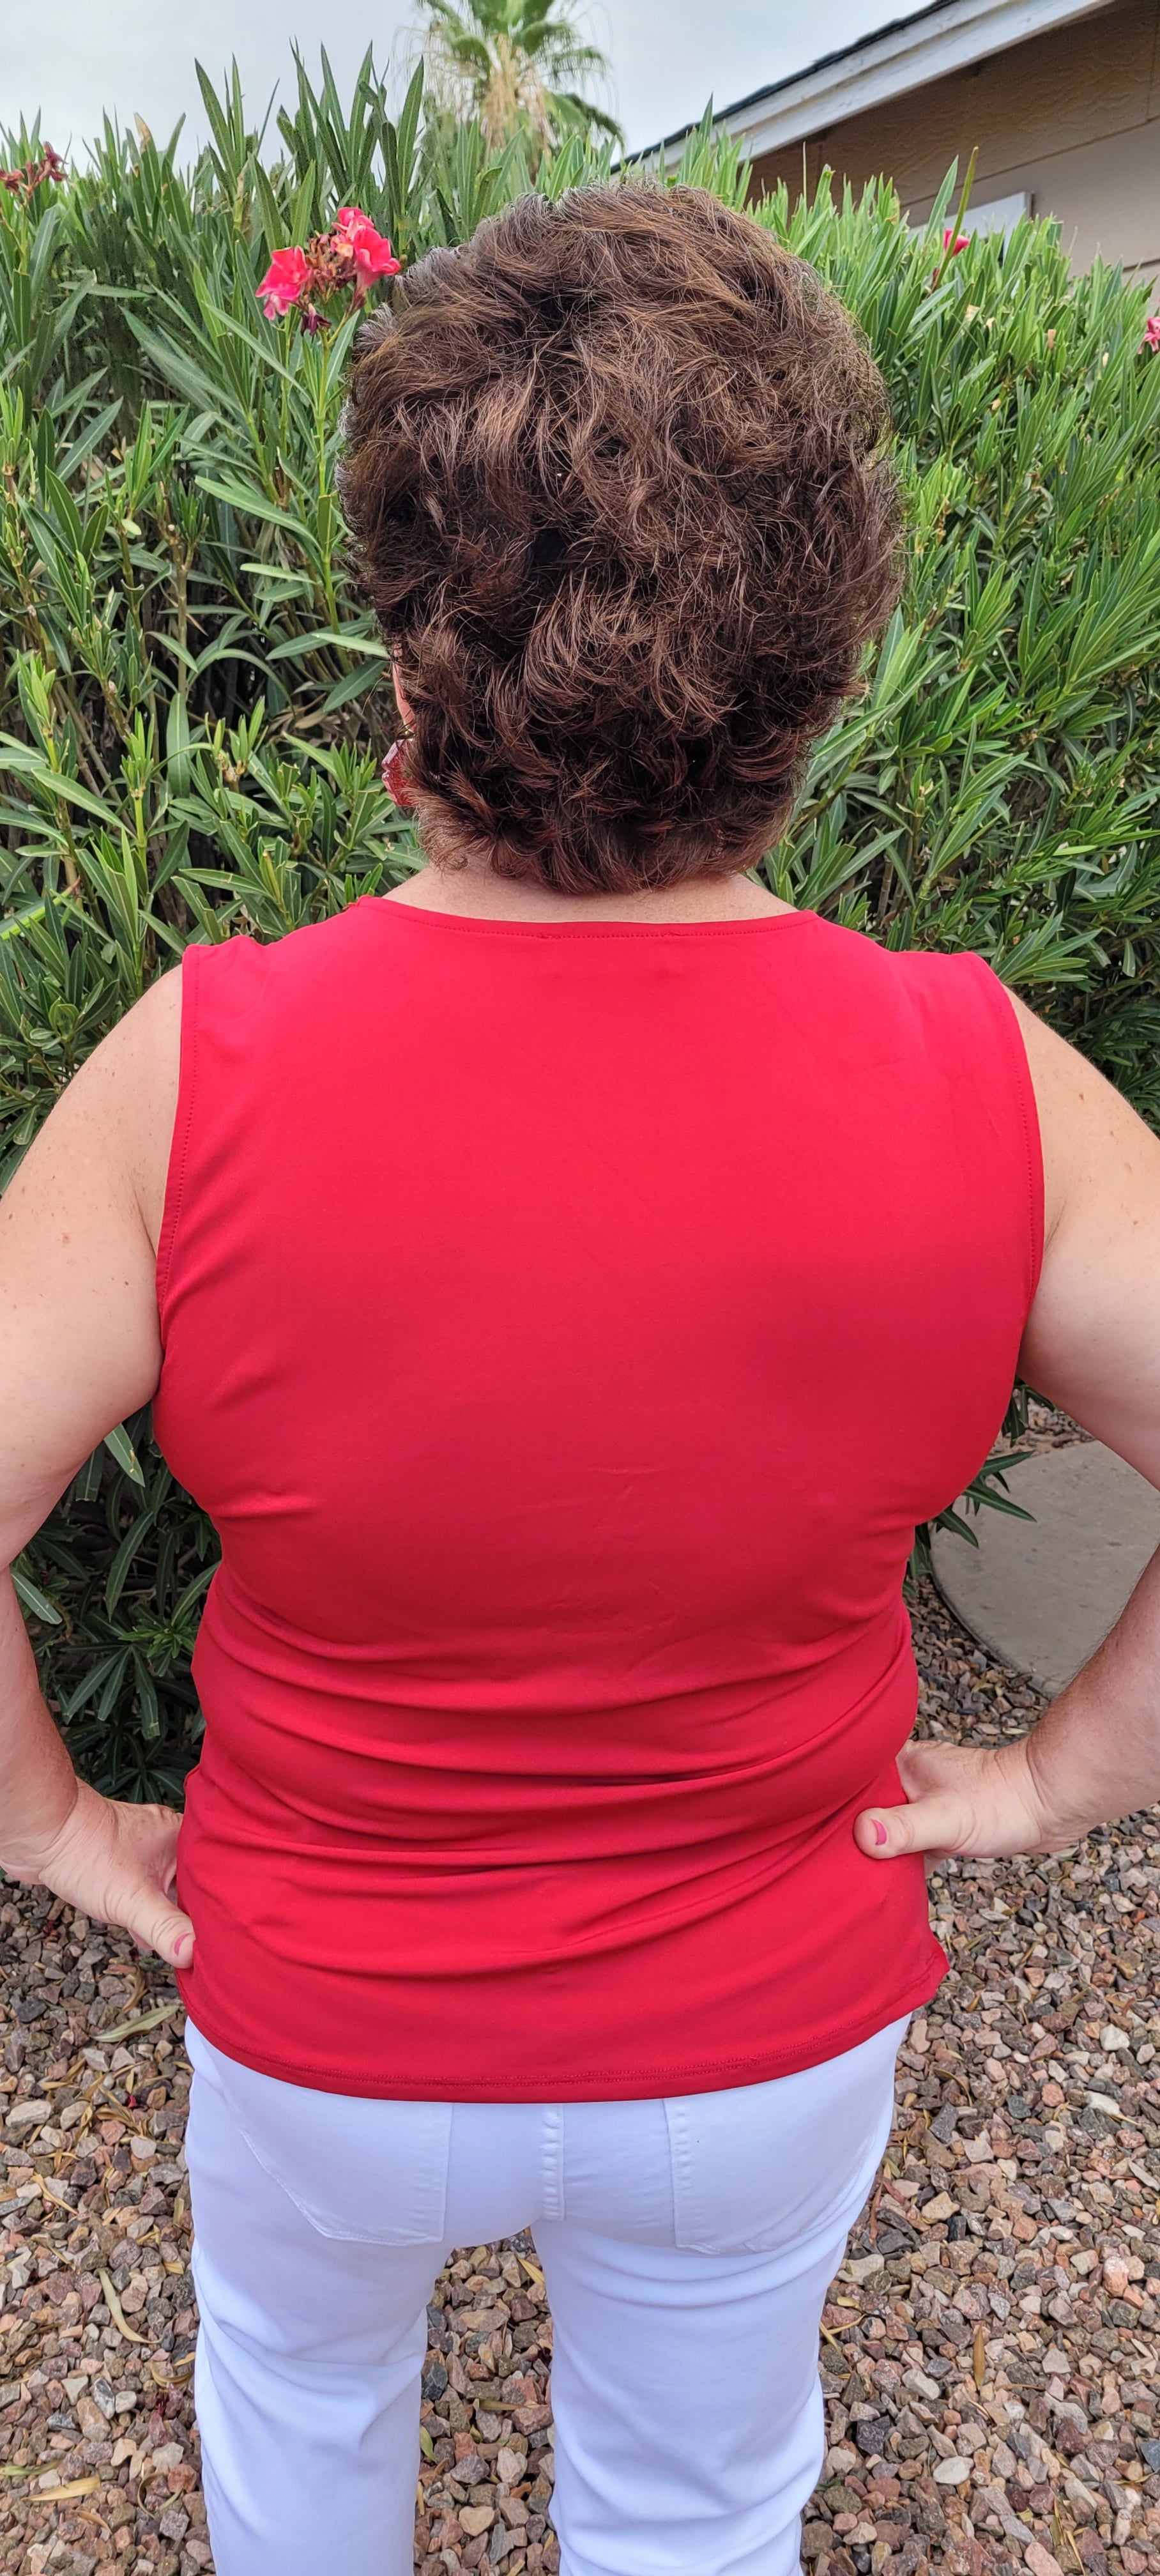 This is a perfect basic staple piece! It is a great piece for layering or great all by itself! This is a sleeveless round neck top, with a knot in front which gives it a gathered layered look, and straight line hem. The color is red. Pair with your favorite pair of denim jeans, shorts, or skirt. Sizes small to X-large